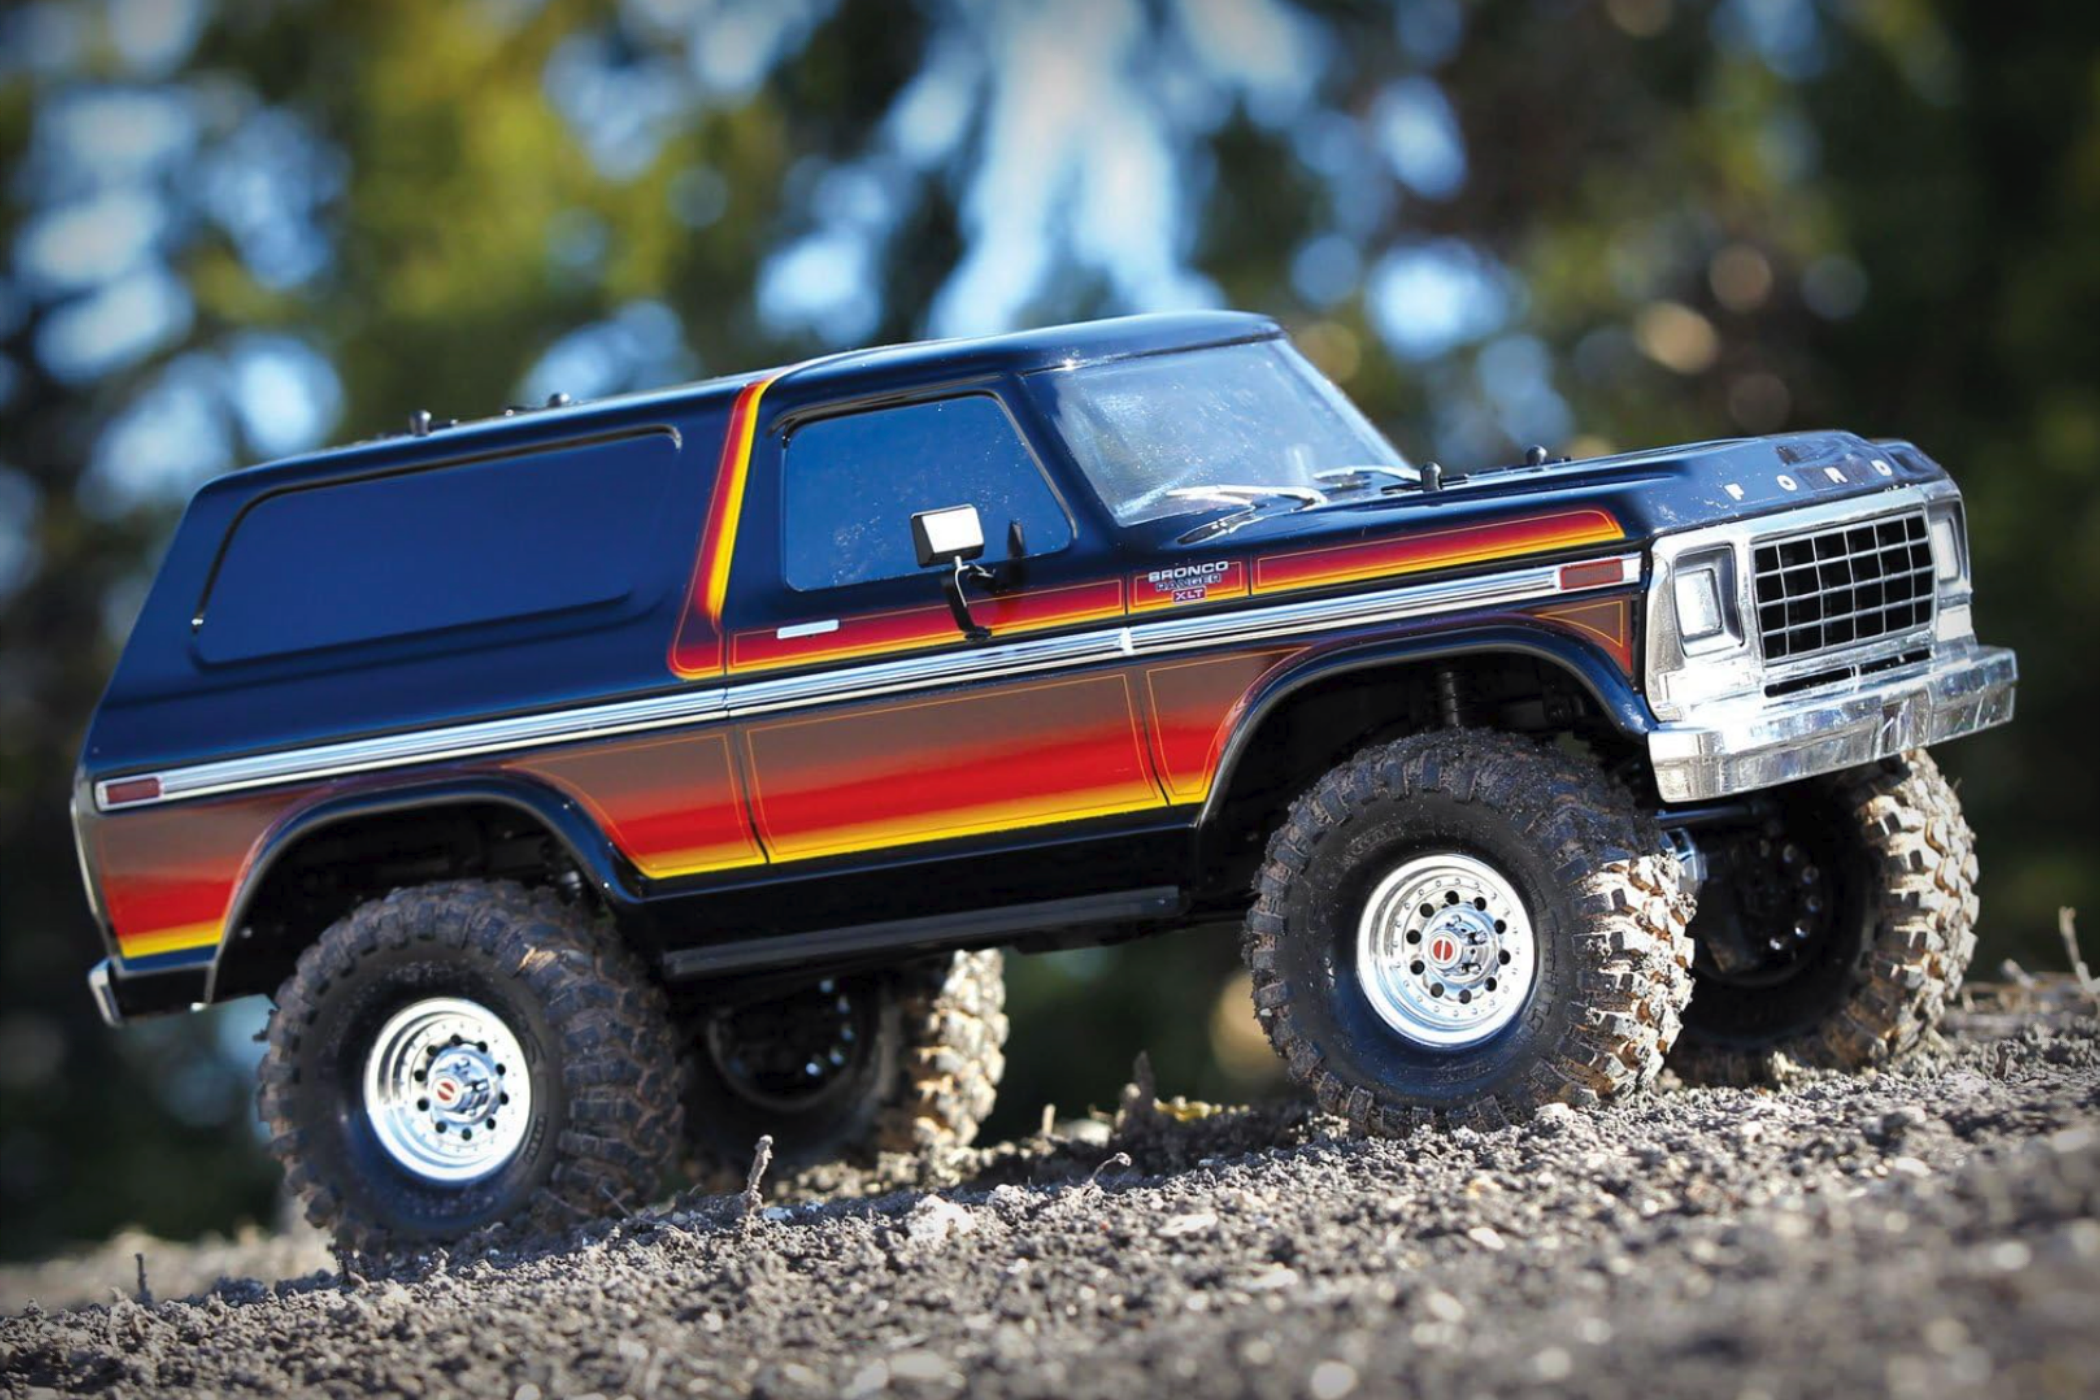 A Traxxas TRX-4 Ford Bronco going uphill